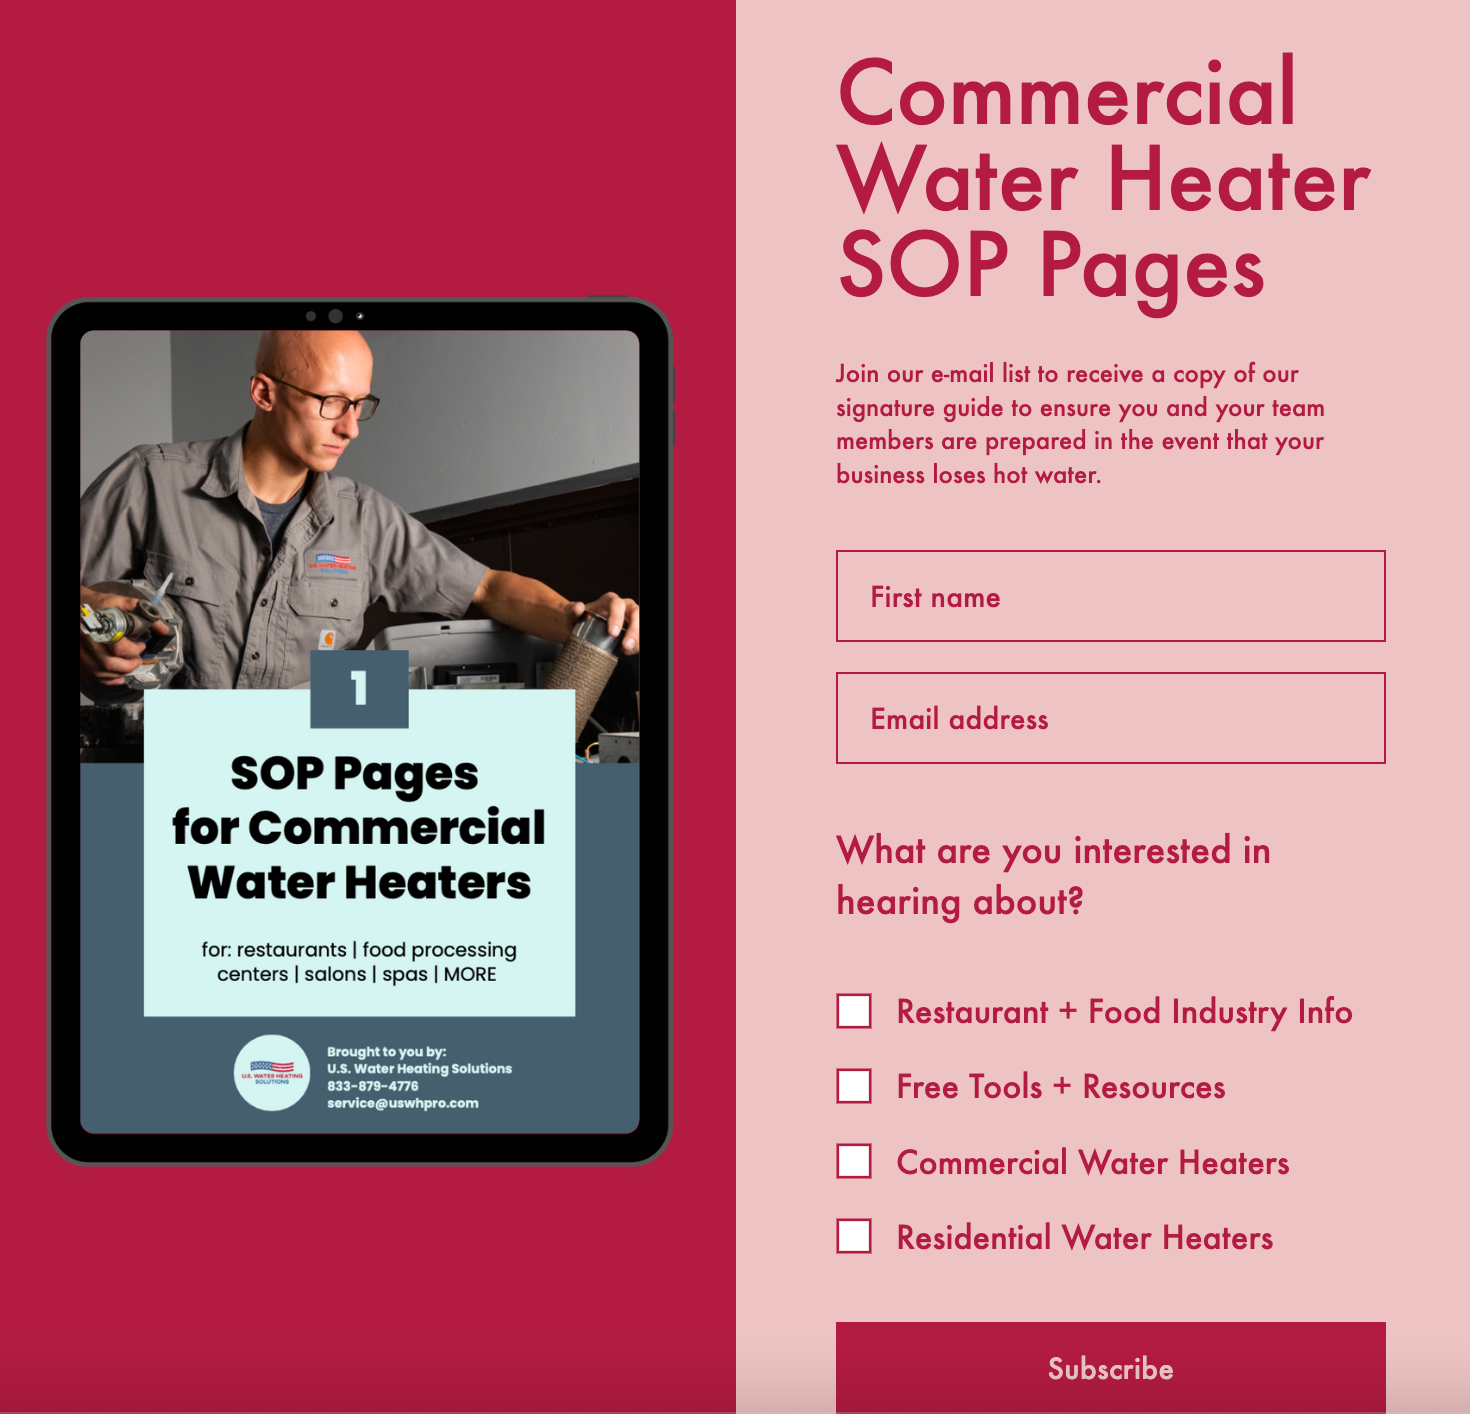 Commercial Water Heater SOP Pages Pop-up Box